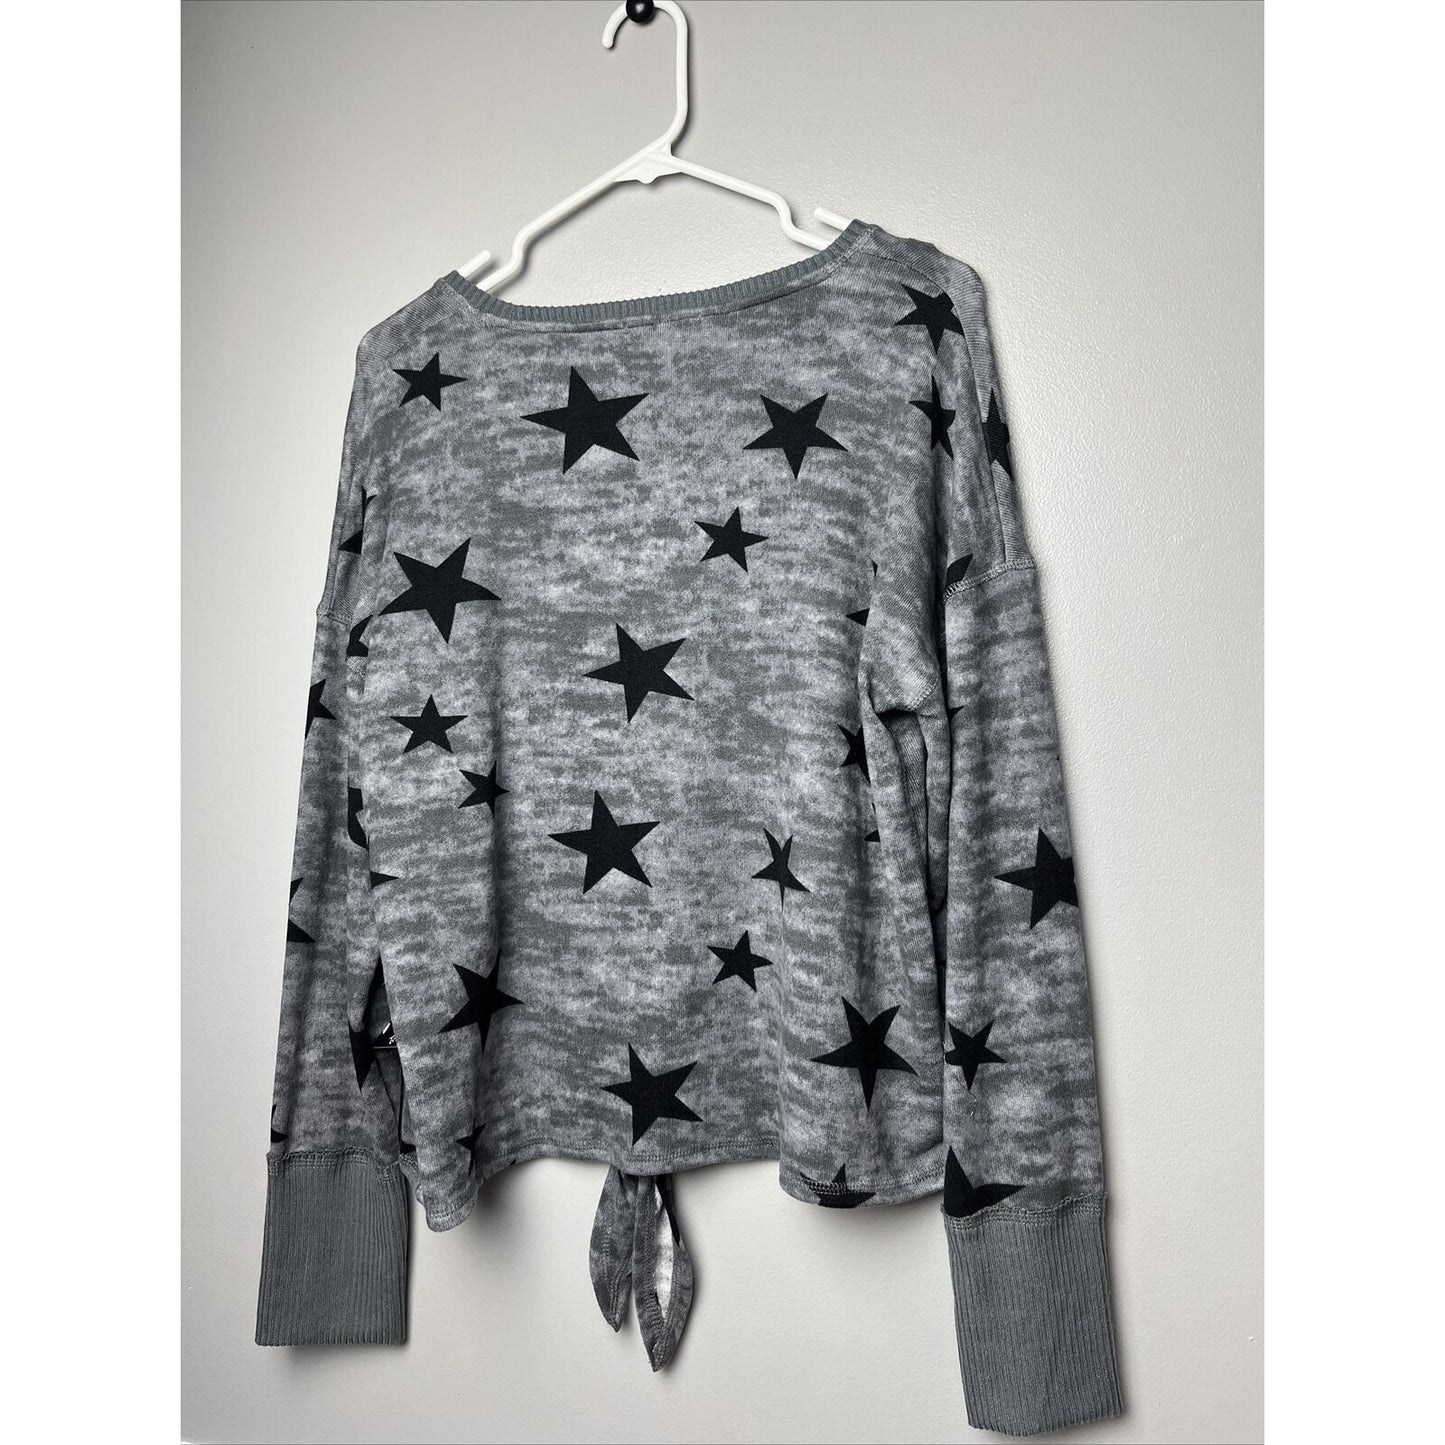 Derek Heart Gray and Black Star Print Tie Front Soft Stretchy Top - New